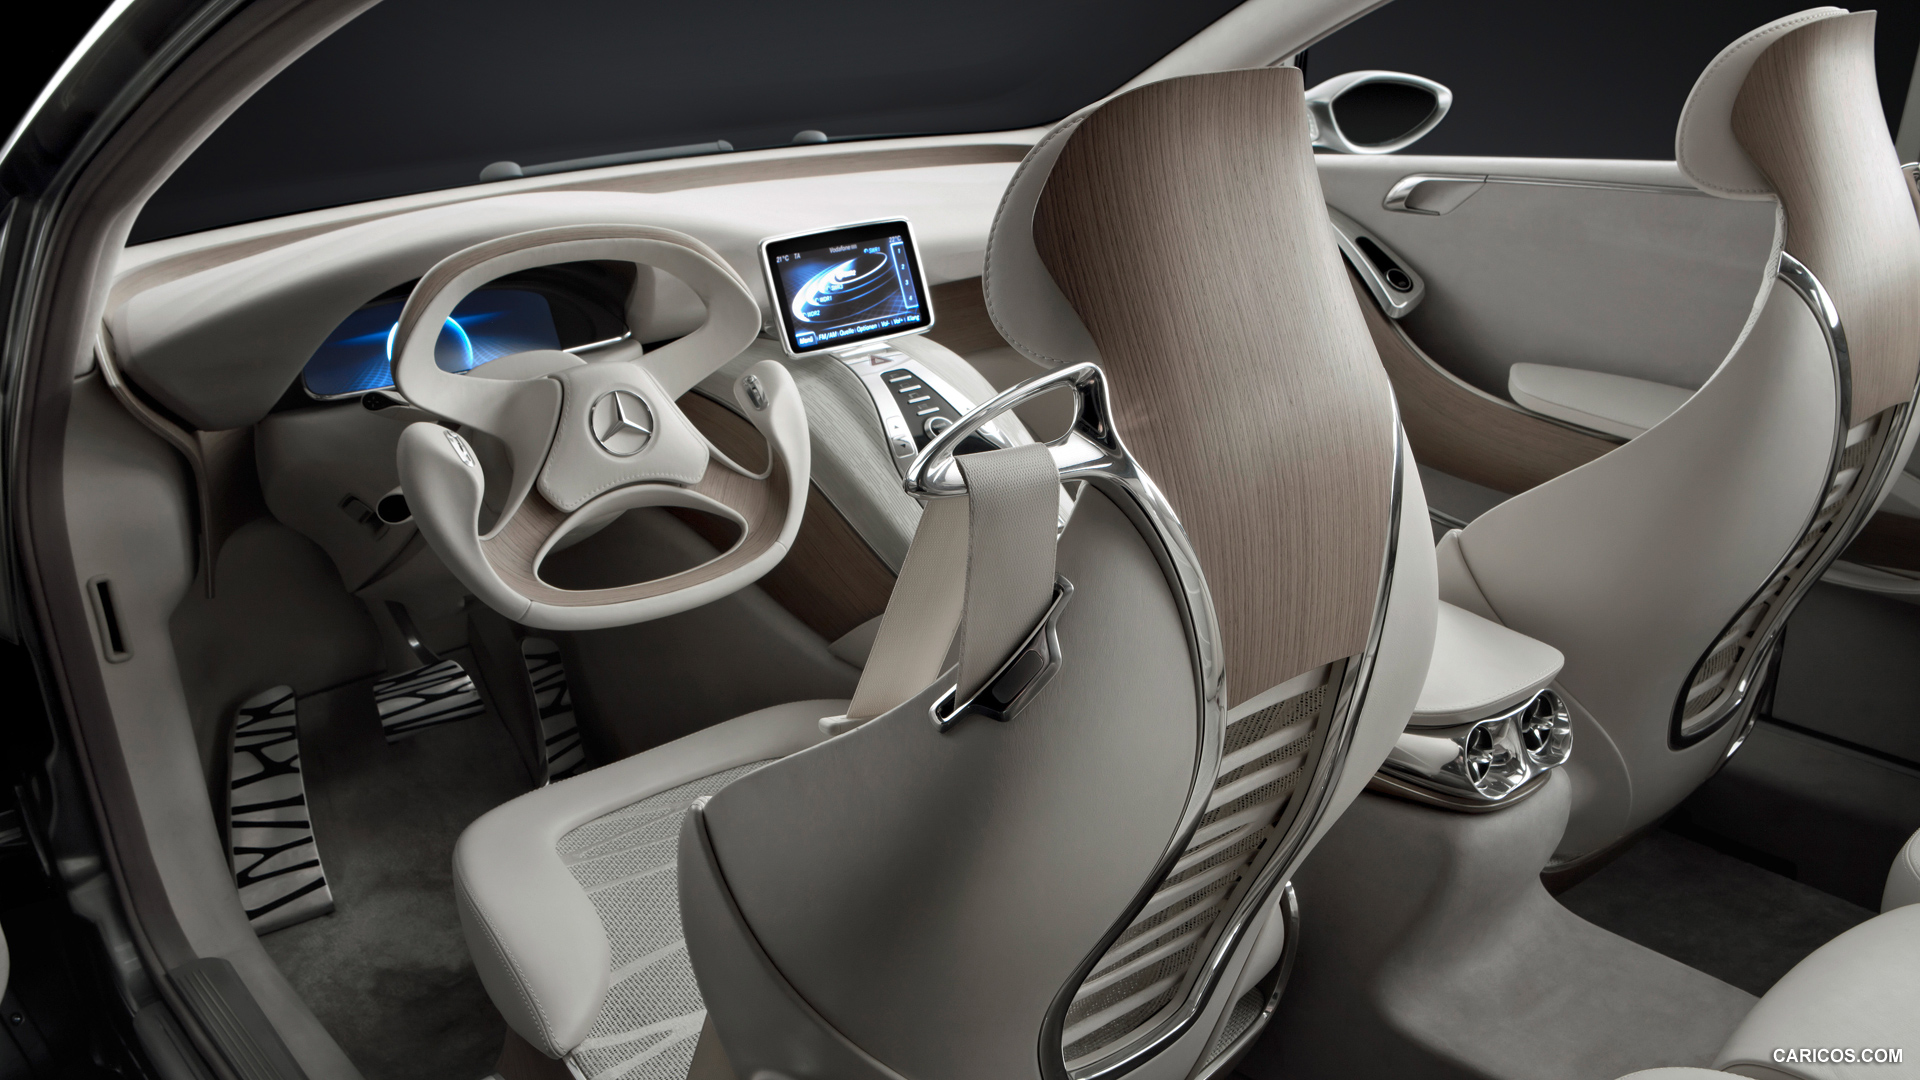 Mercedes-Benz F800 Style Concept (2010)  - Interior, Front Seats, #45 of 120